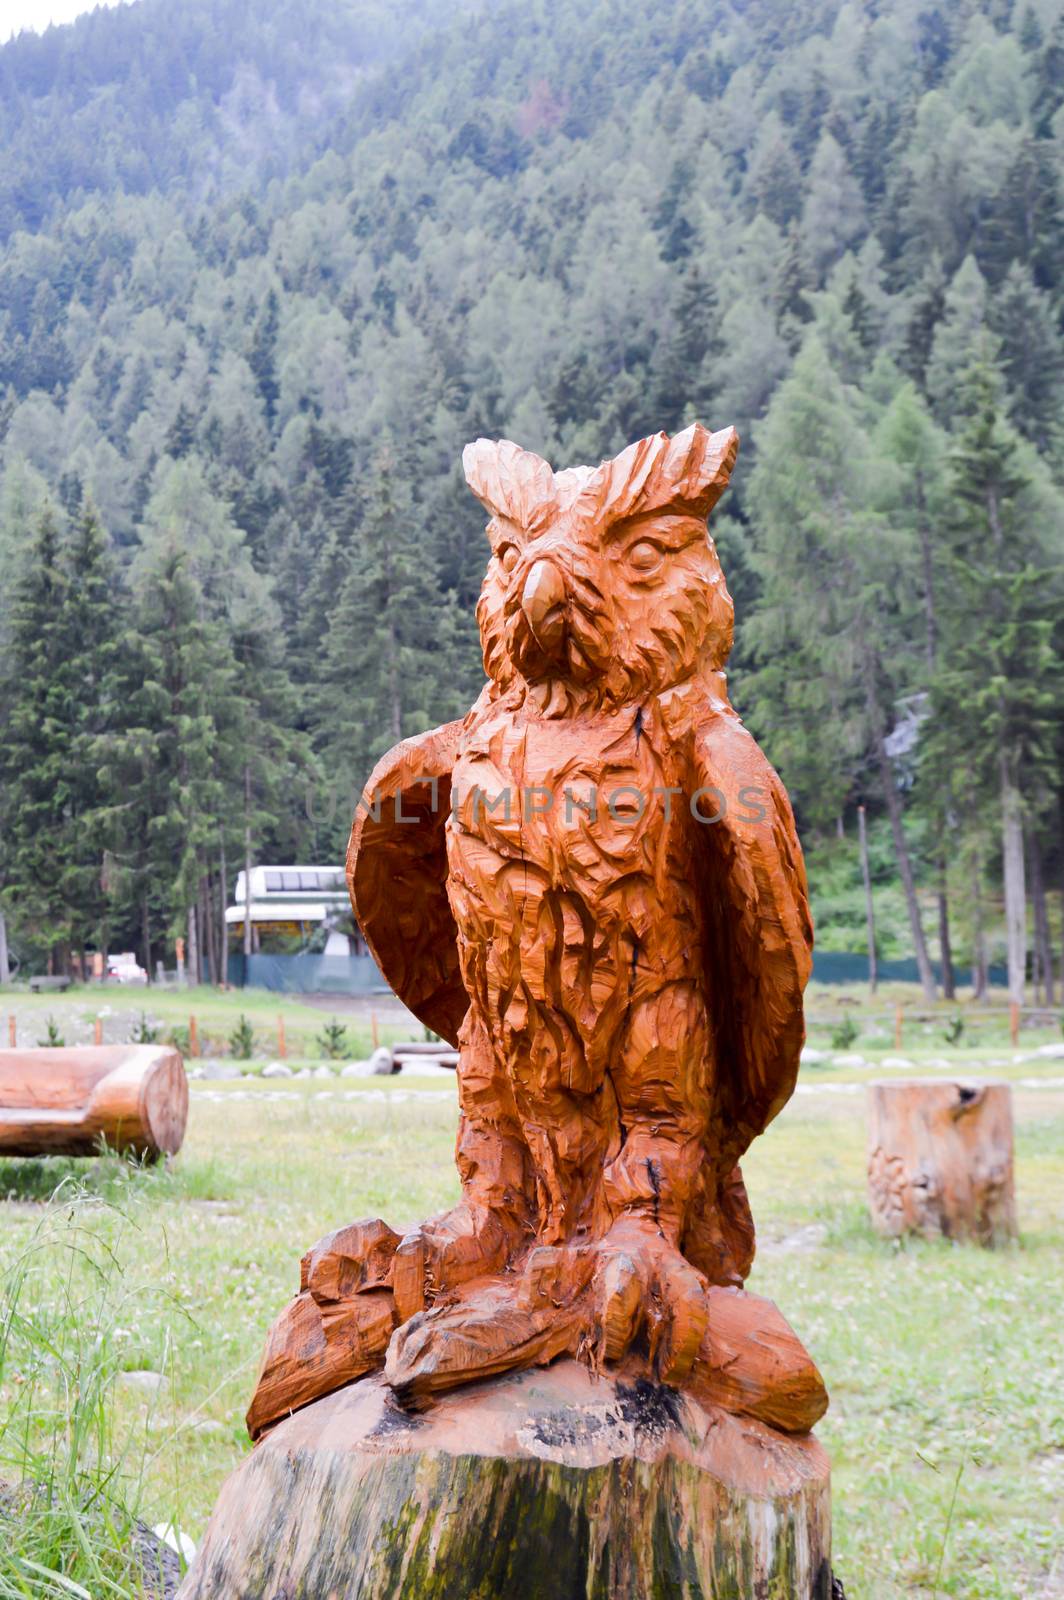 Sculpture of an owl on a tree trunk  by Philou1000